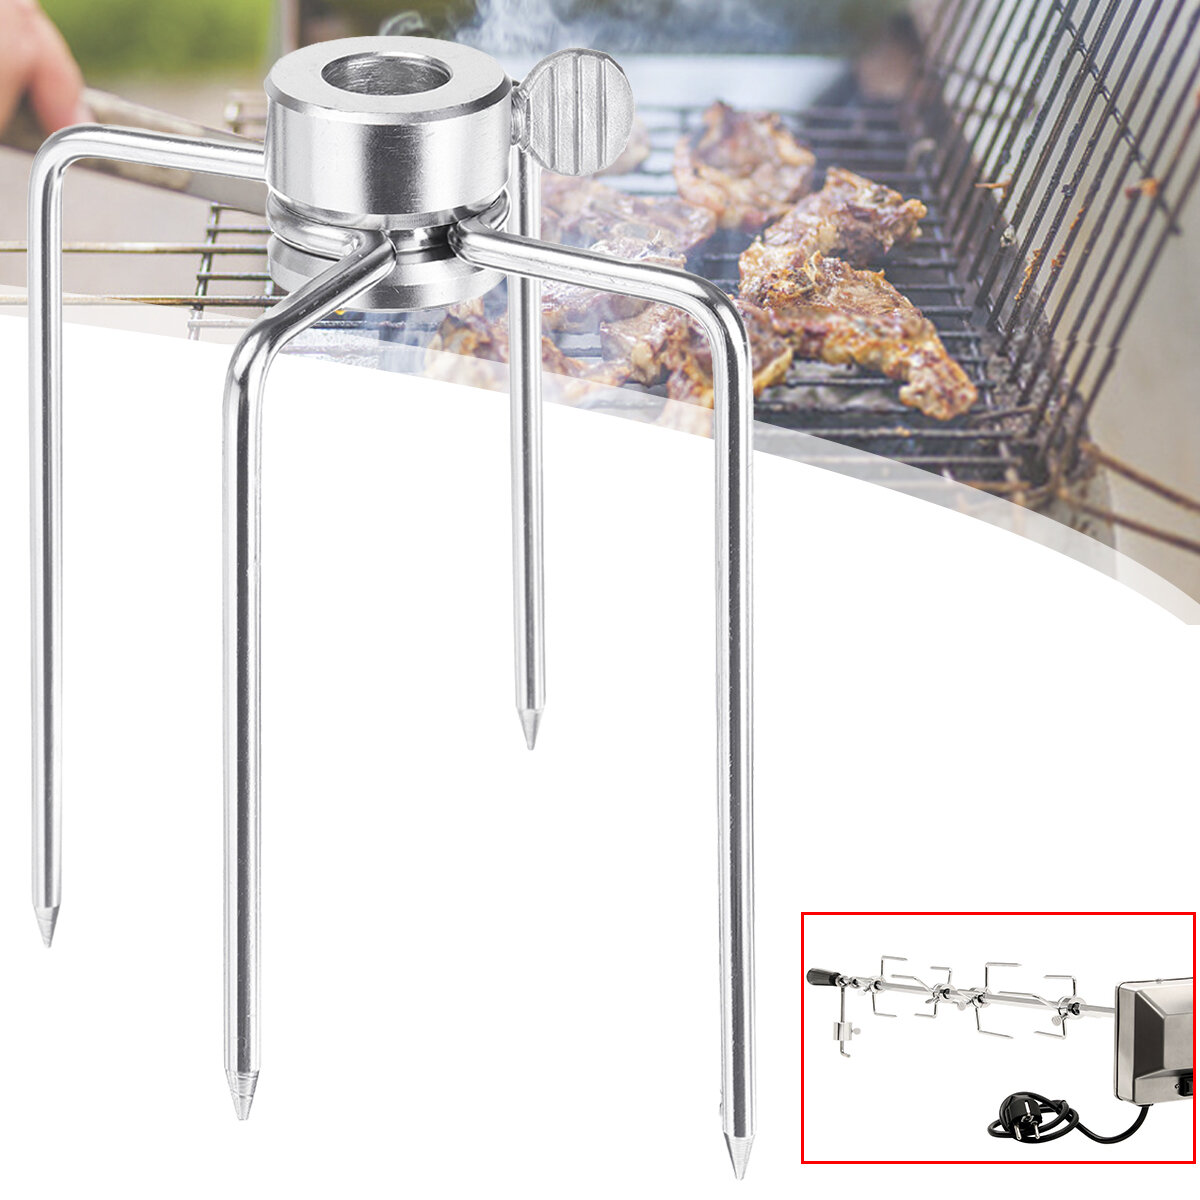 2Pcs BBQ Skewer Stainless Steel Barbeque Kebab Camping Cooking Grill Stick Fork